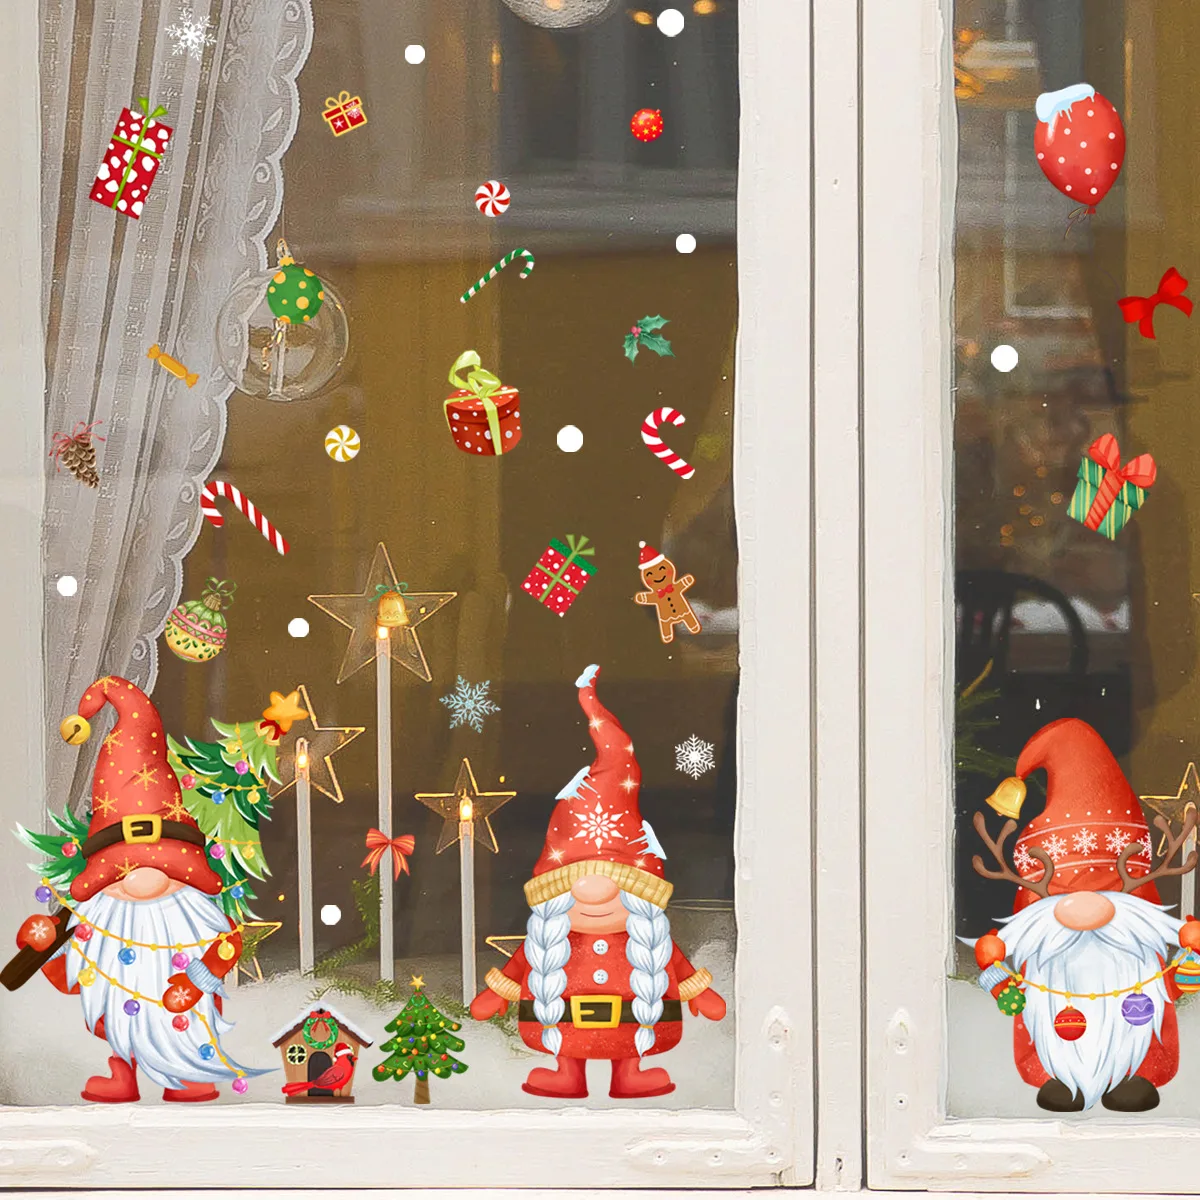 3pcs Cartoon Santa Christmas Static Stickers Wall Stickers Double-sided Visual Glass Window Wall Stickers Wallpapers Dj4035 2pcs easter egg bunny window glass cartoon stickers static stickers window double sided visual decorative wall stickers dj005